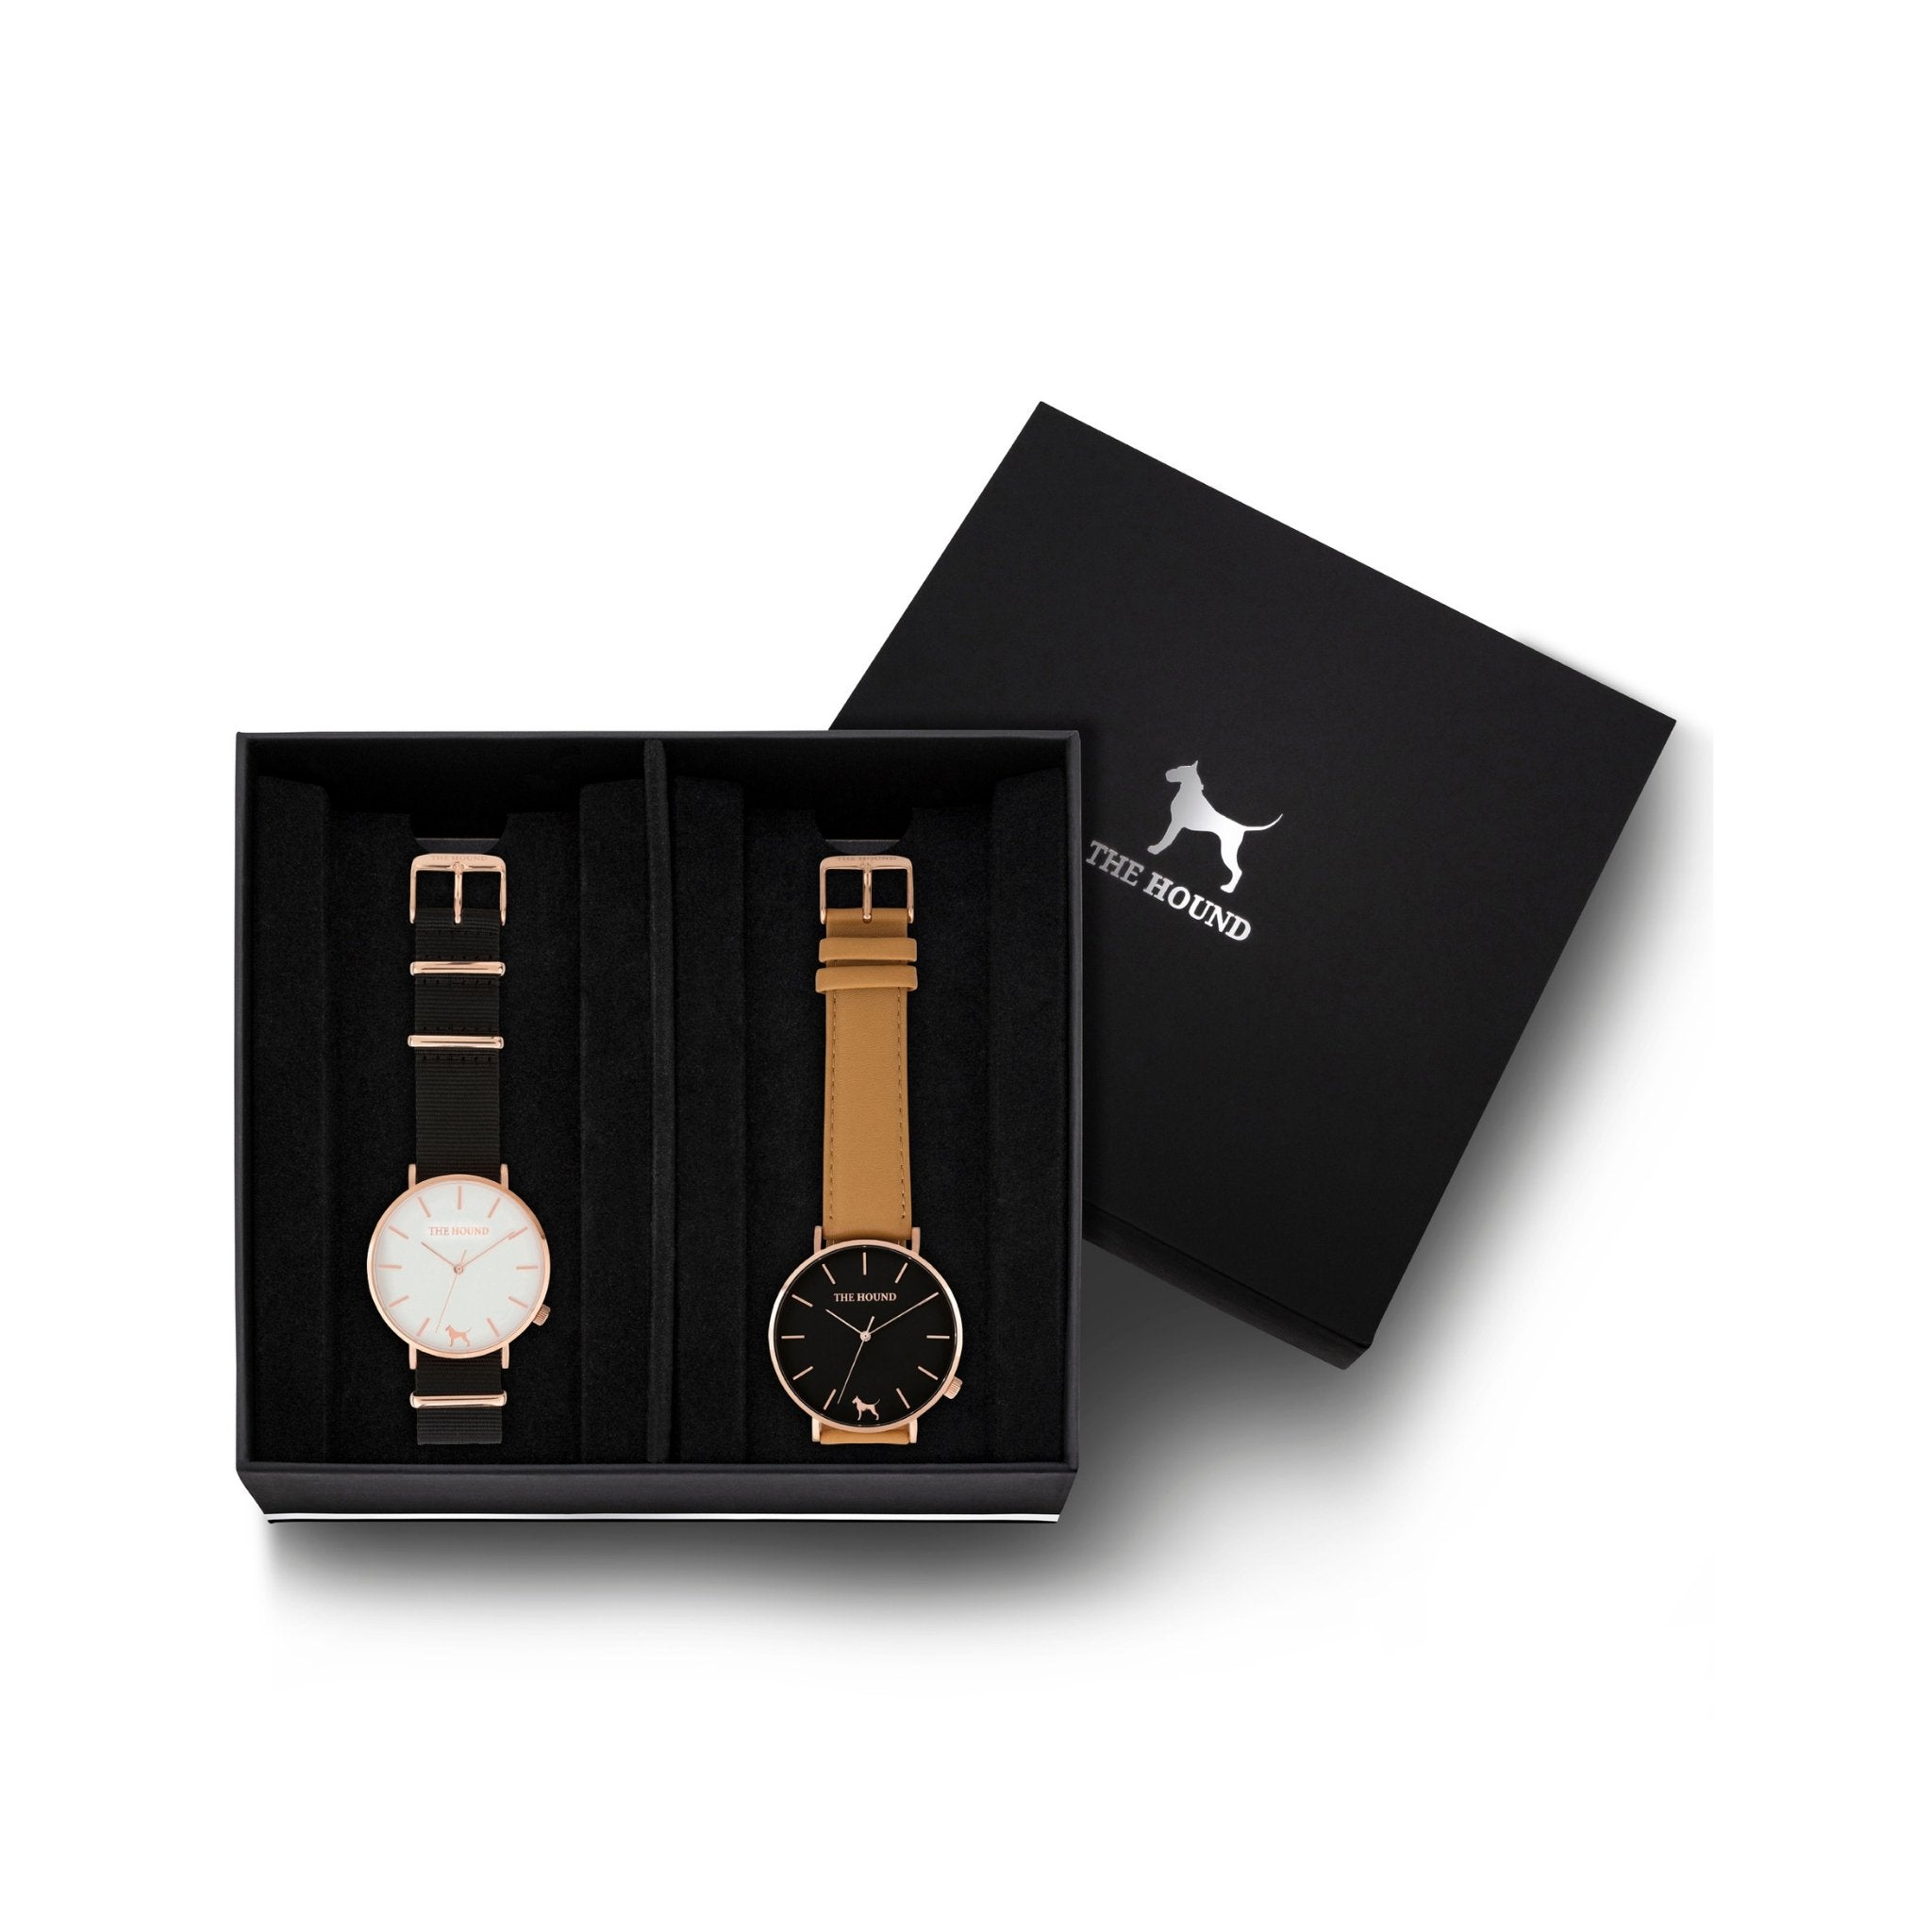 Custom gift set - Rose gold and white watch with black nato band and a rose gold and black watch with stitched camel genuine leather band